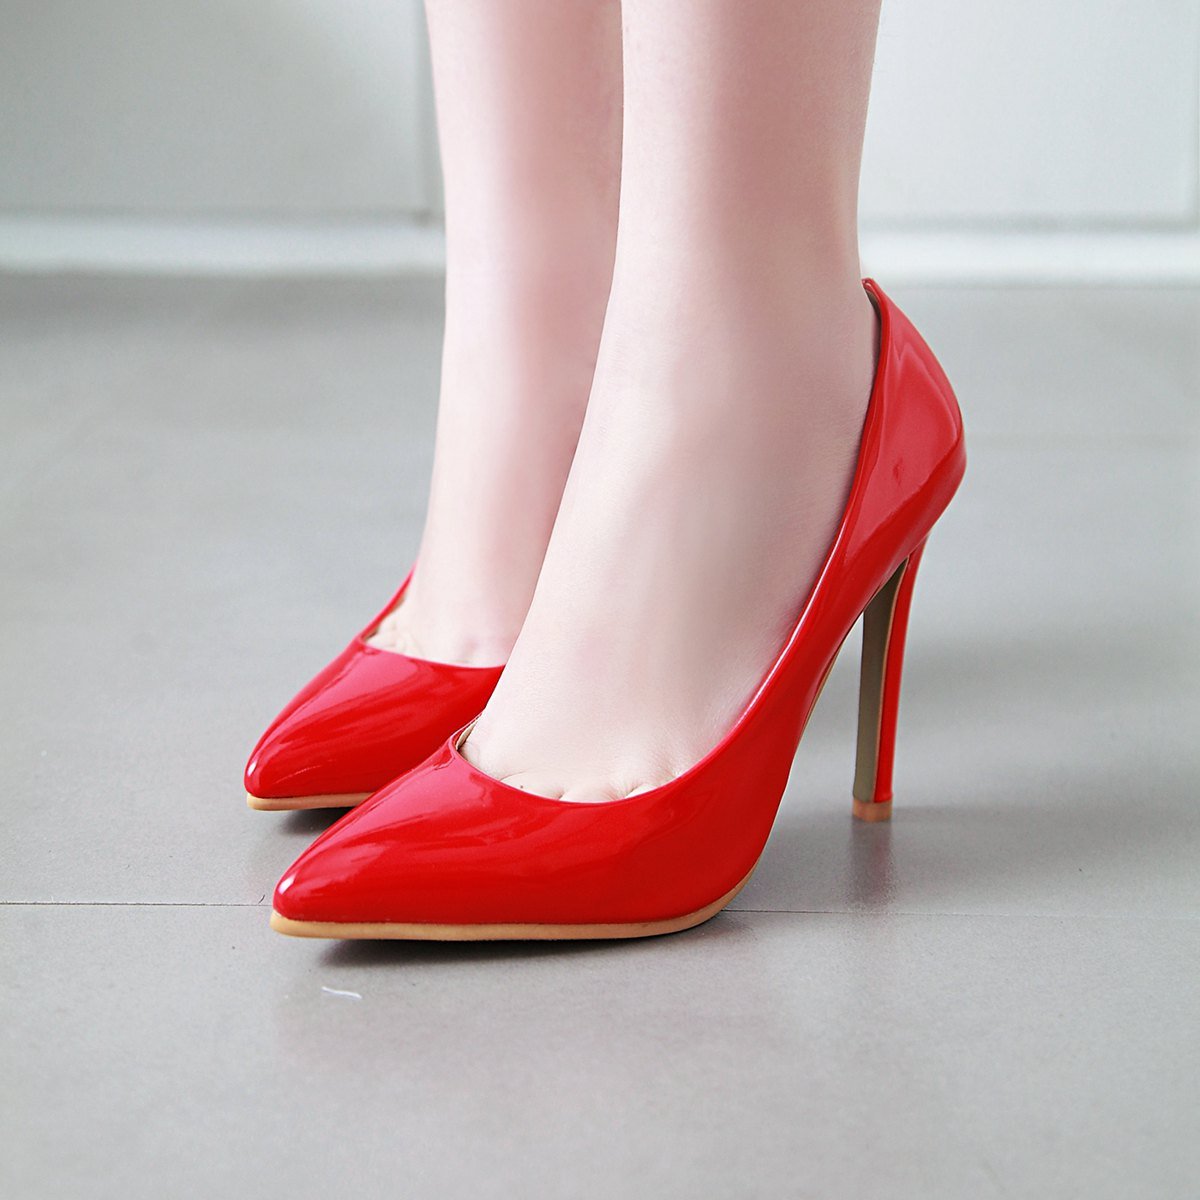 Women's Sexy Ultra-High Heeled Shallow-mouth Stiletto Pumps